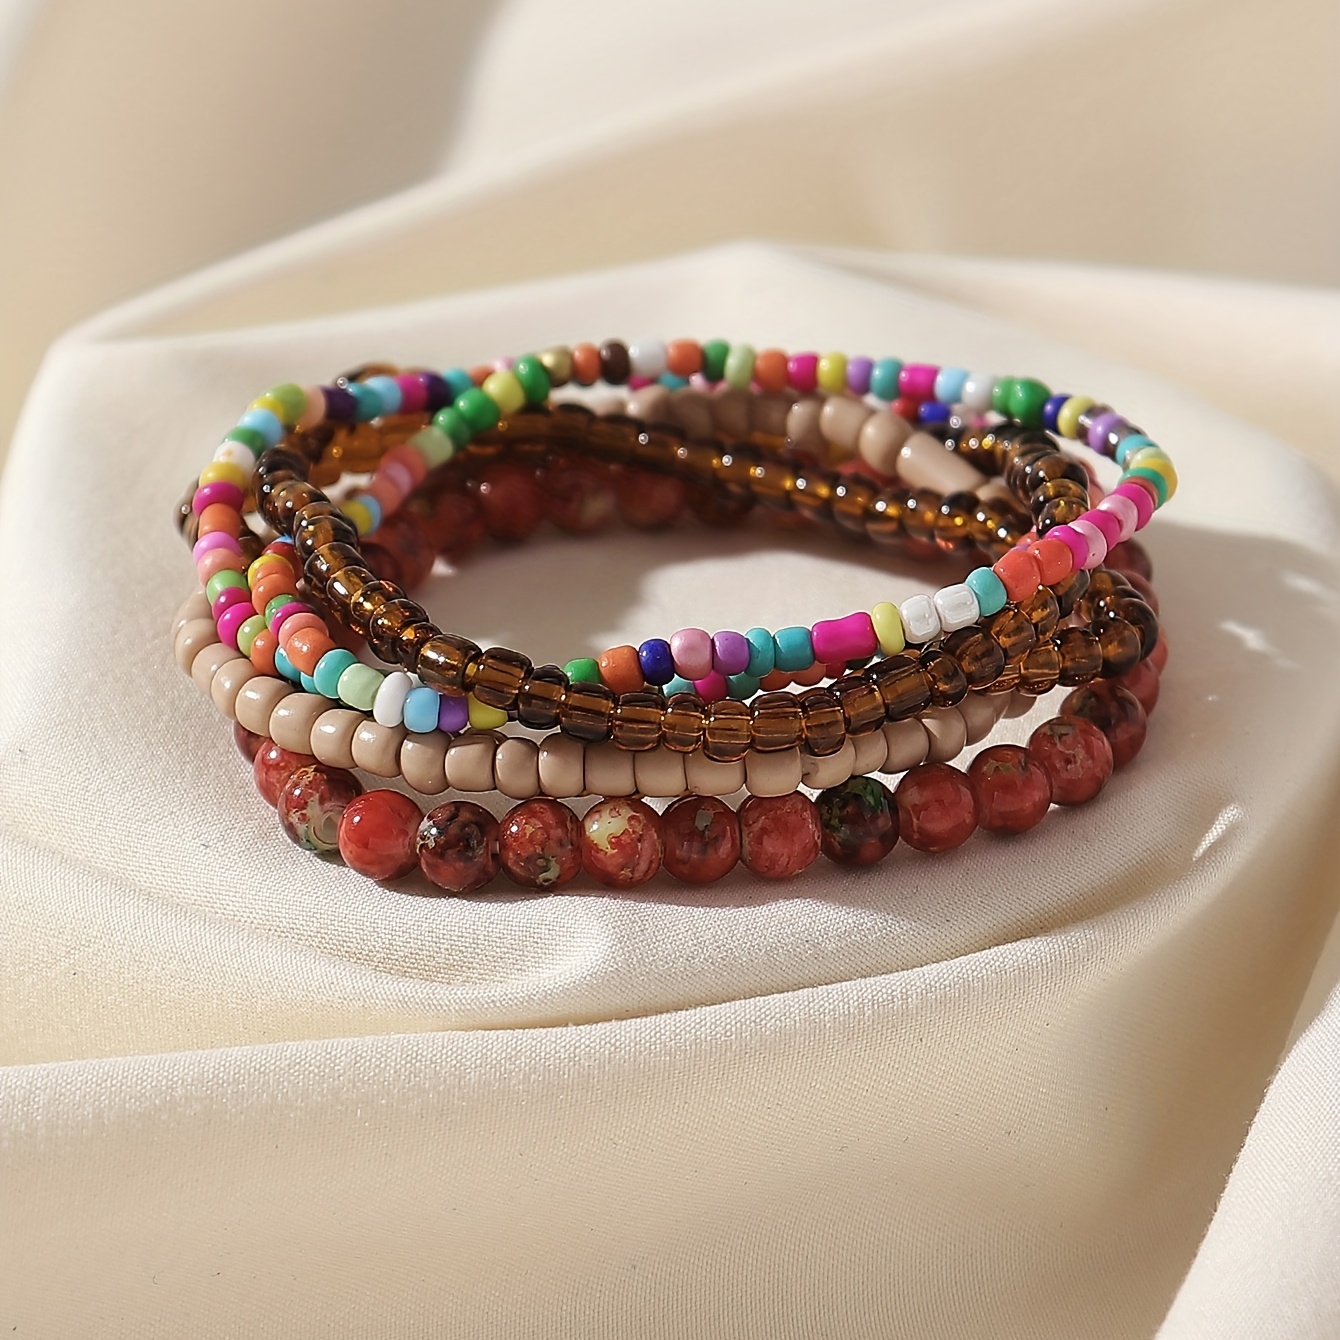 Bead and String Combo Bracelets - Set of 3 Dark Brown